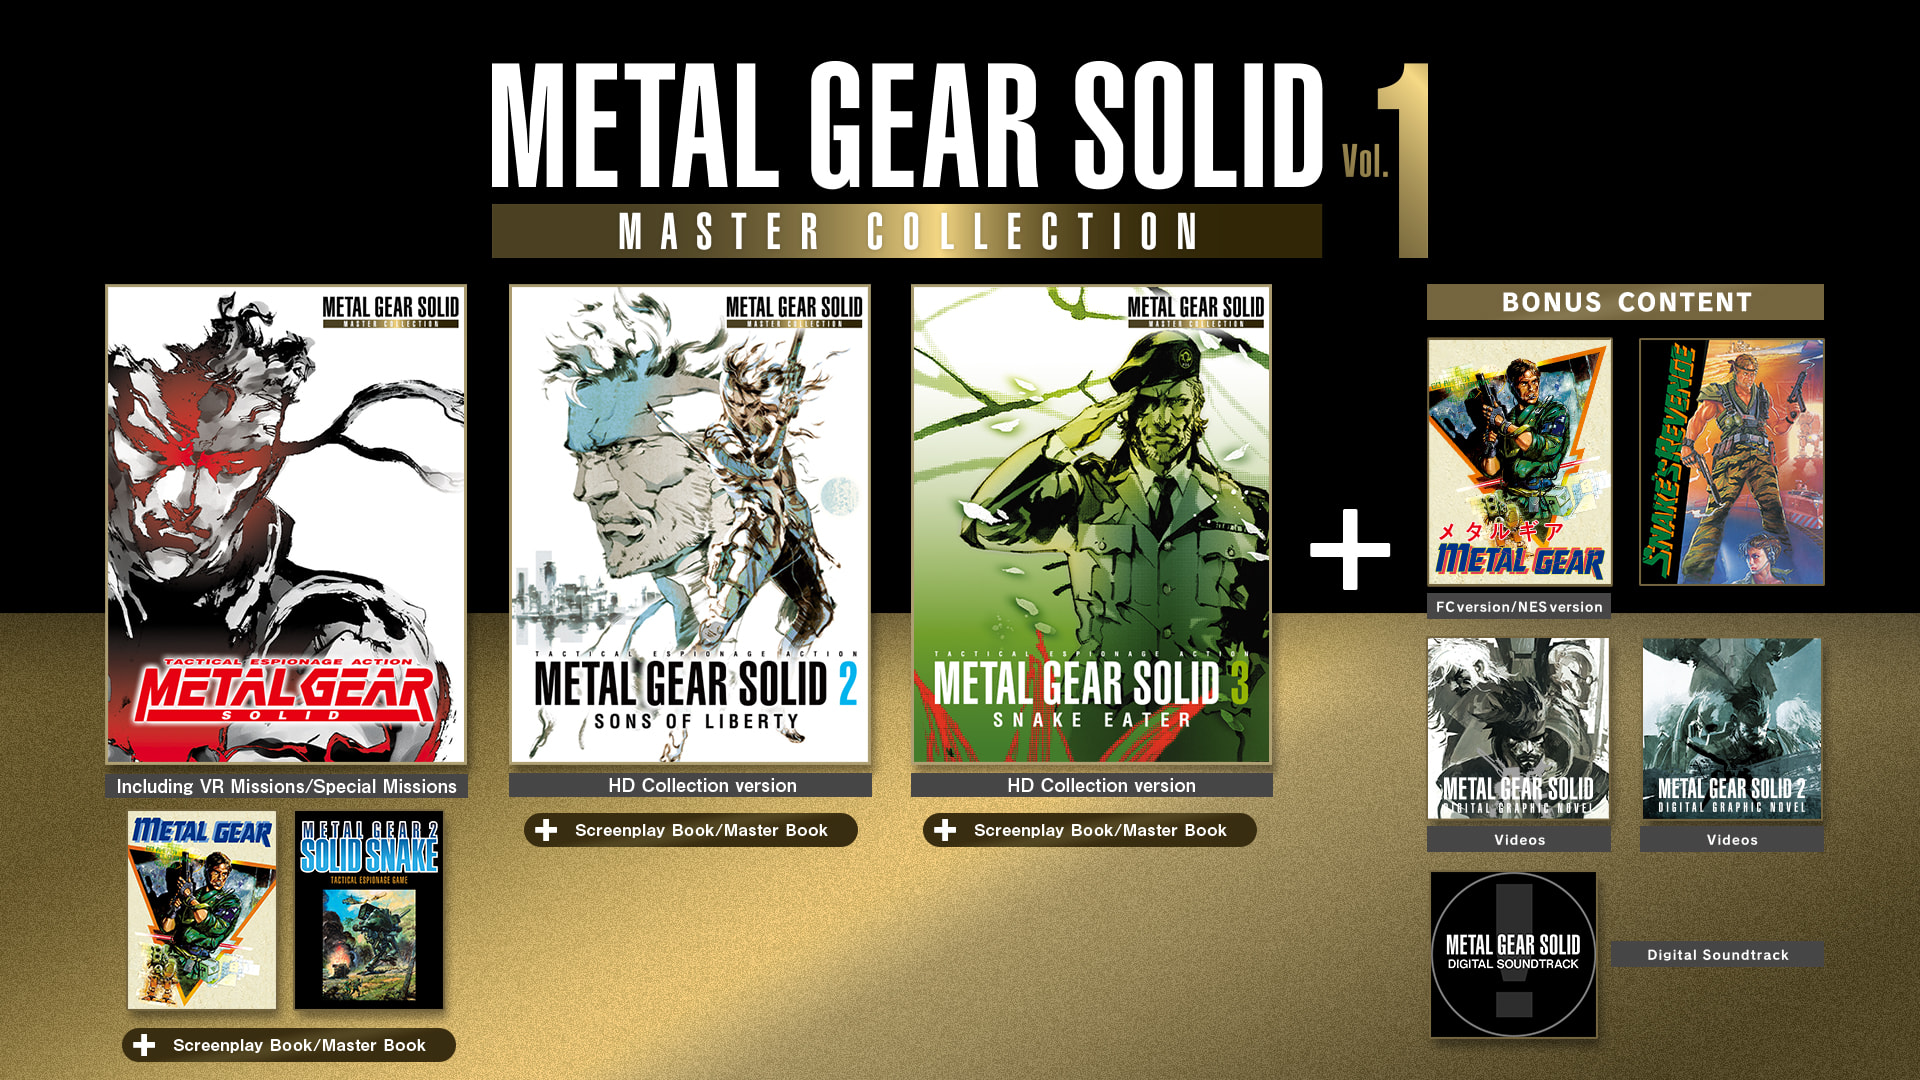 METAL GEAR SOLID: MASTER COLLECTION Vol. 1 for Nintendo 